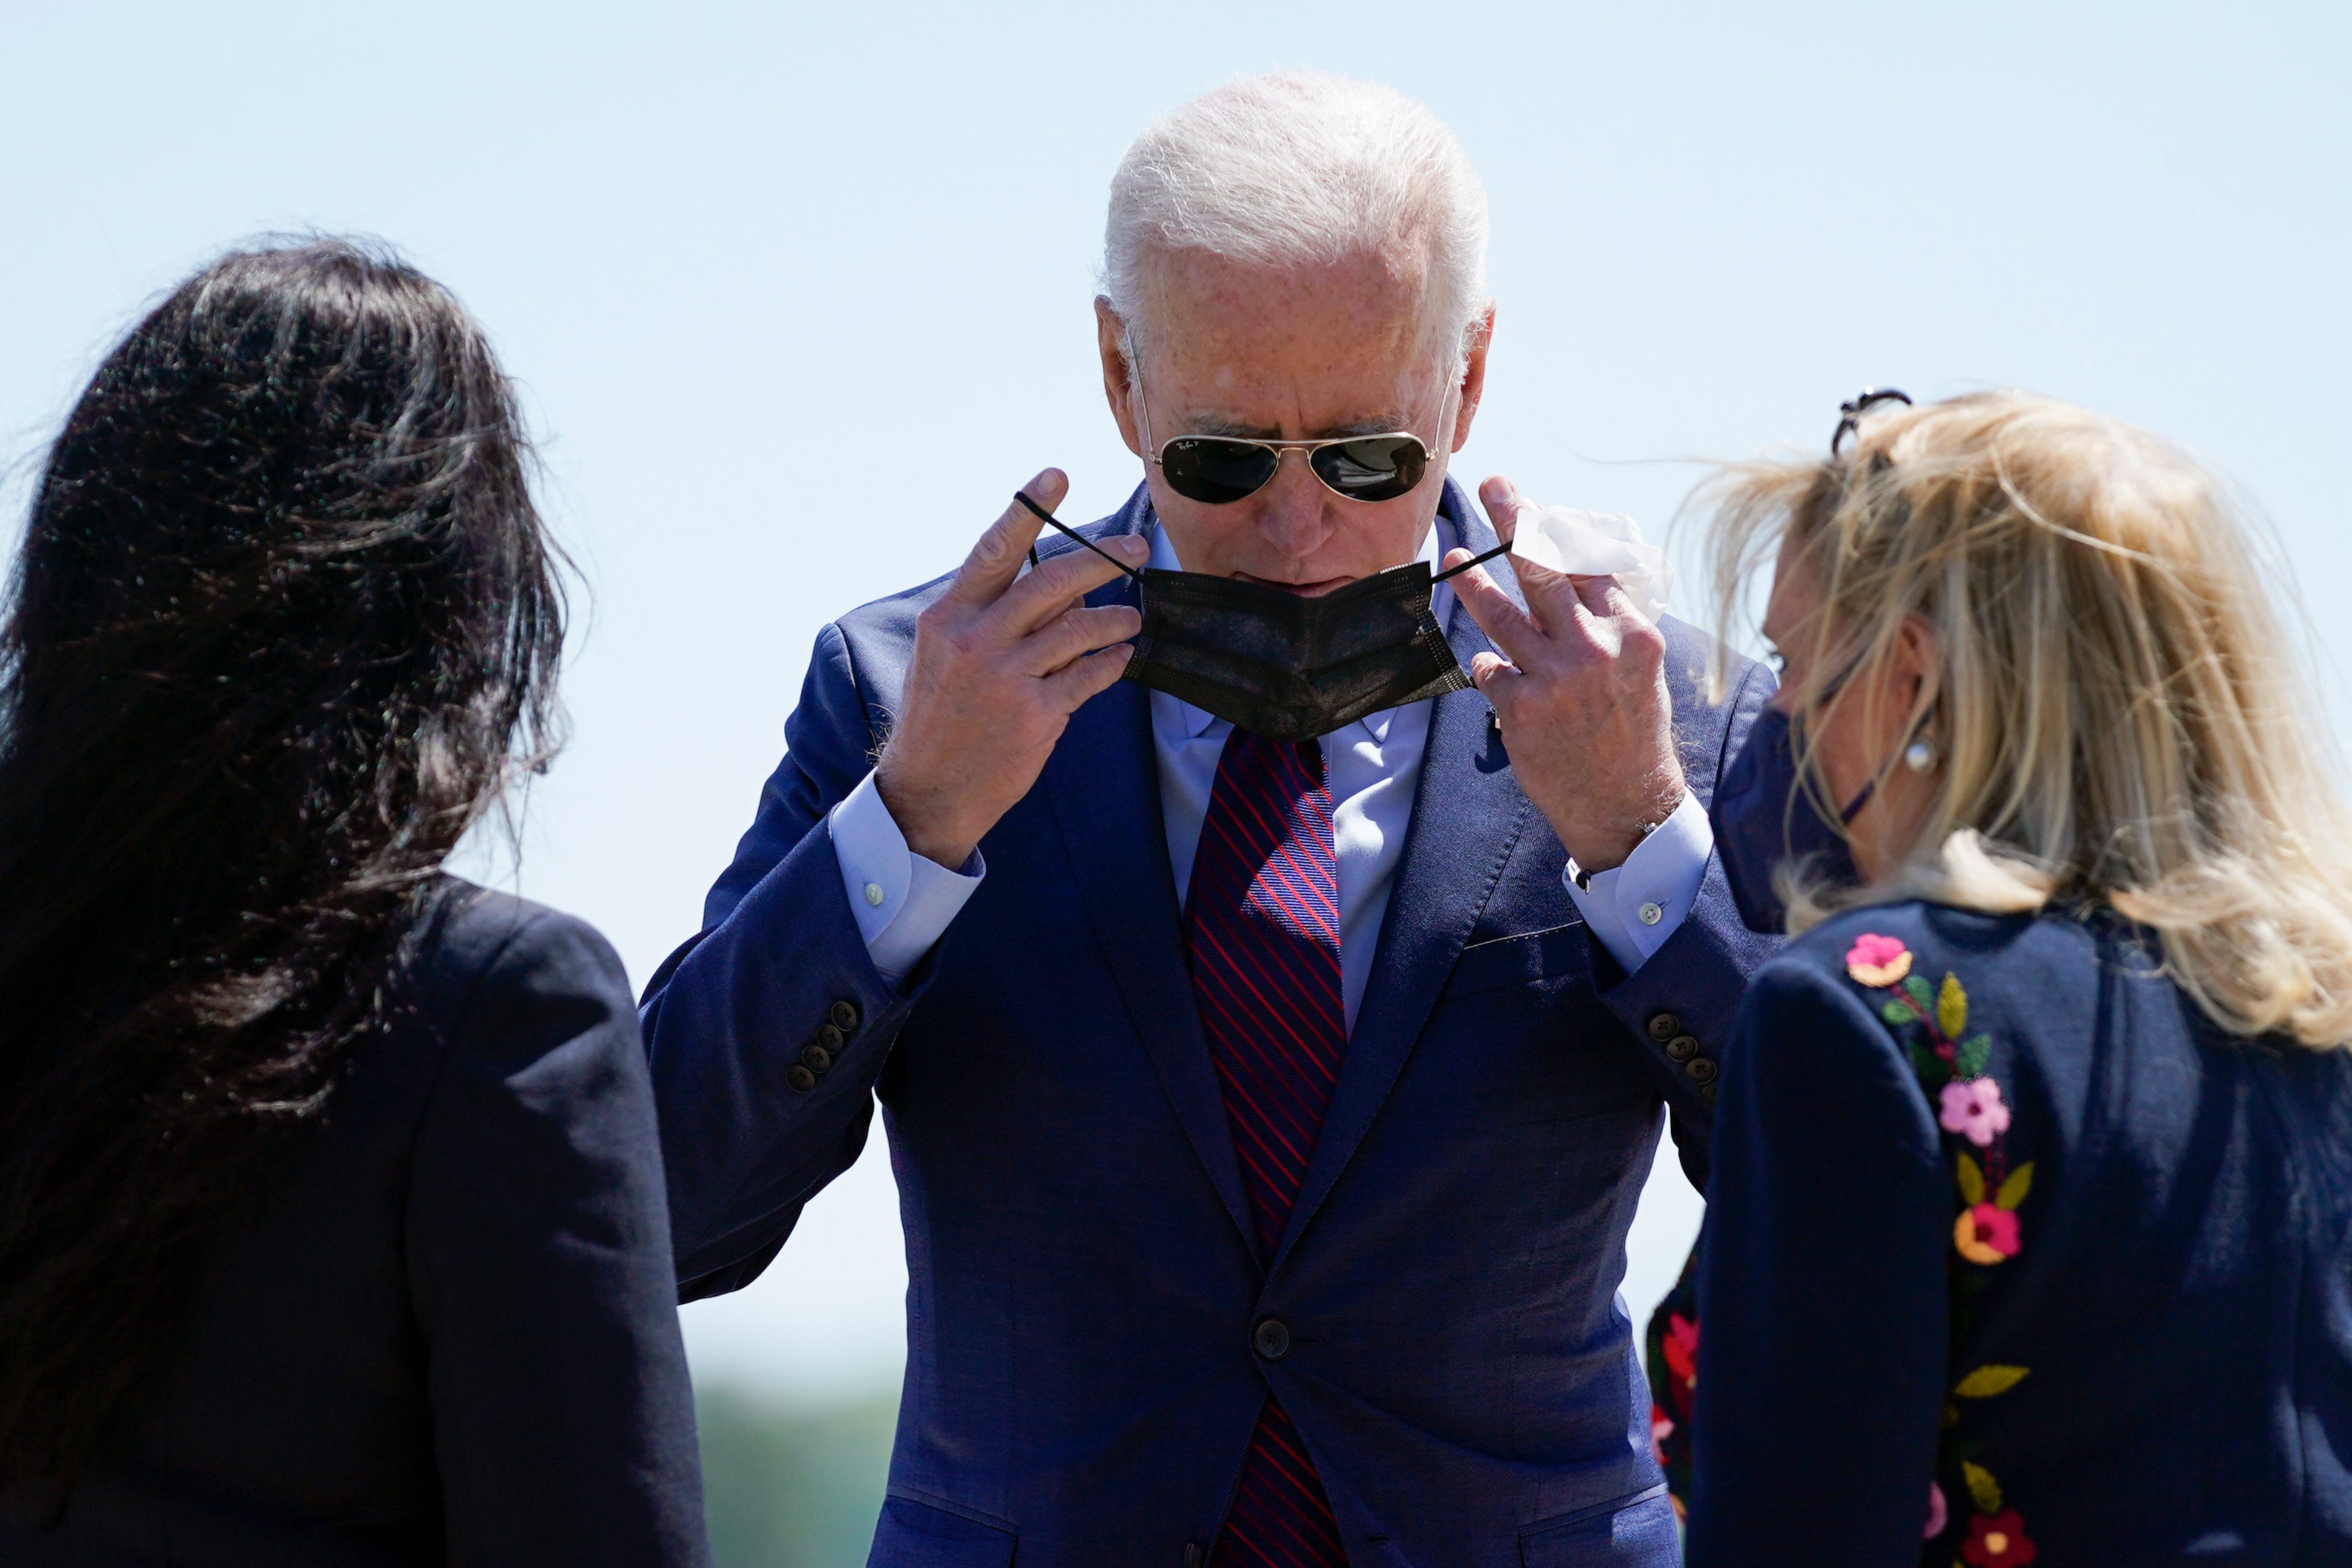 President Joe Biden puts on his face mask as he is greeted by Rep. Rashida Tlaib, D-Mich., left, and Rep. Debbie Dingell, D-Mich, as he arrives at Detroit Metropolitan Wayne County Airport.